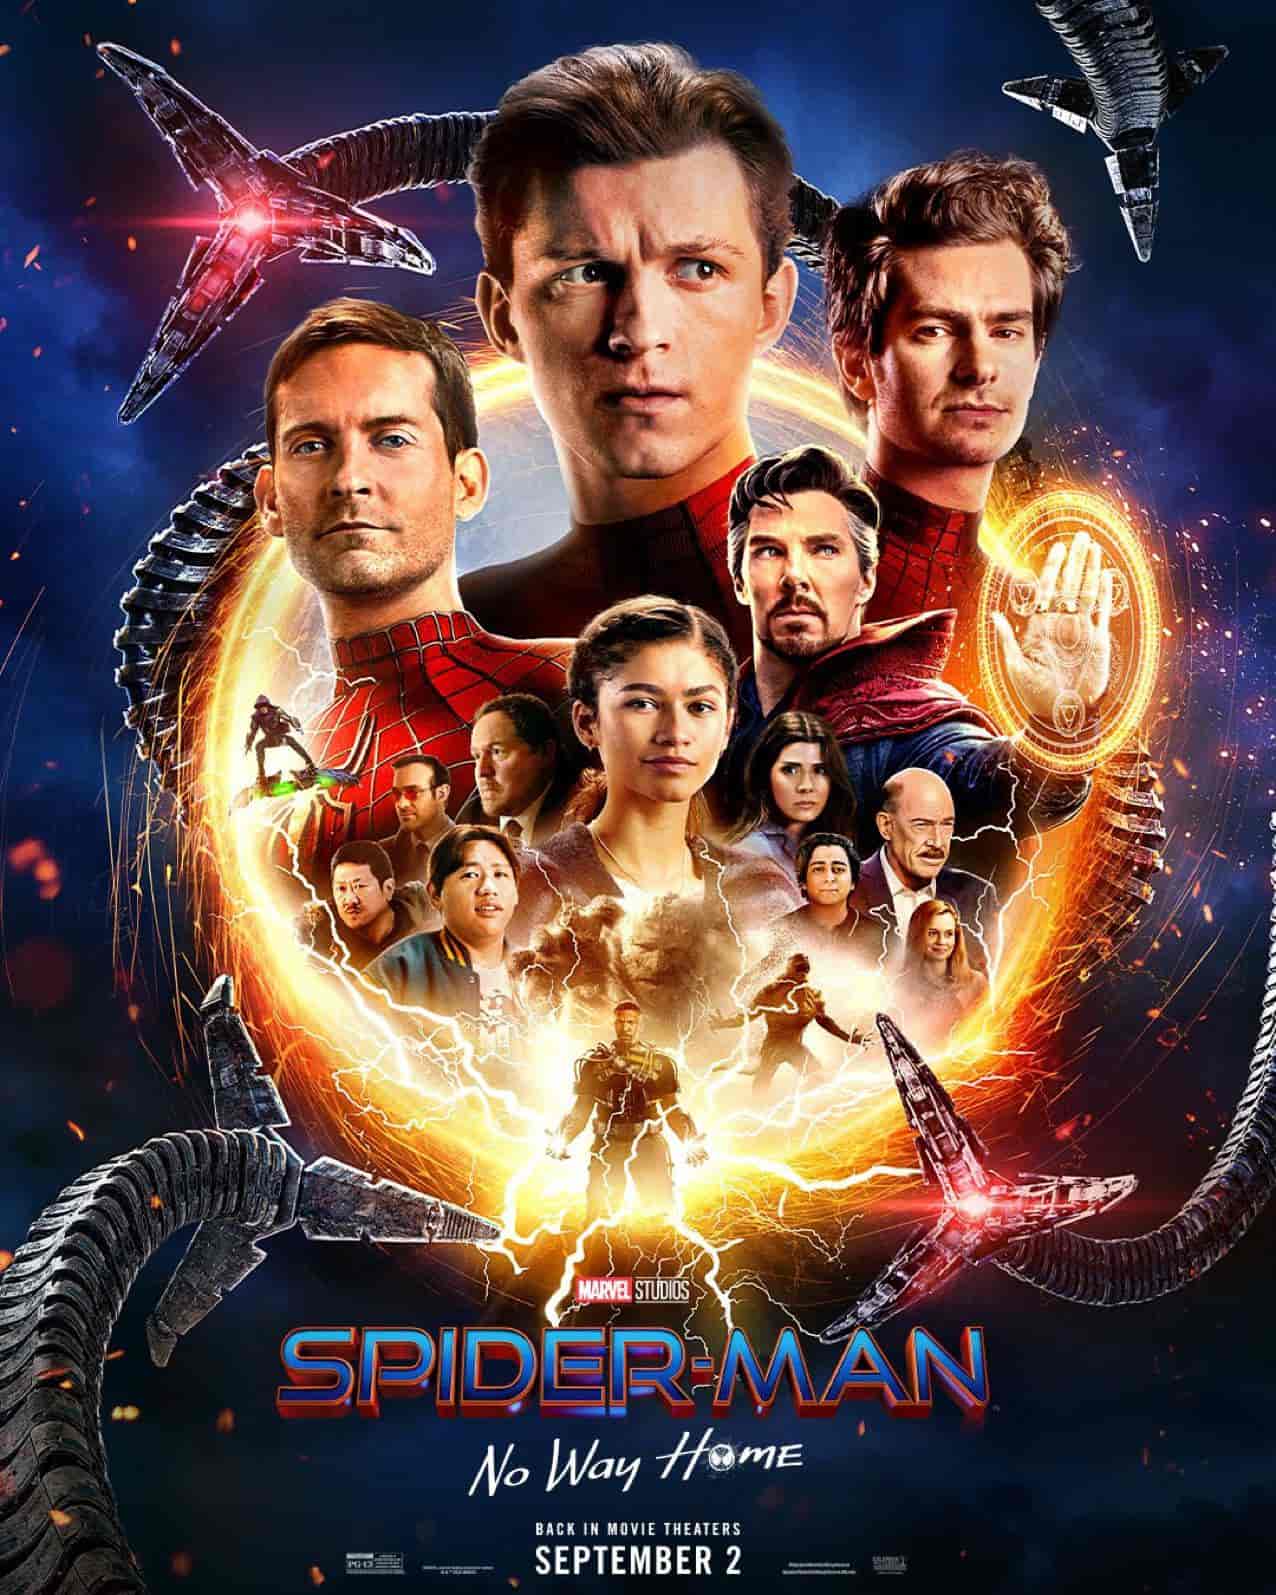 Spiderman: No Way Home New Poster